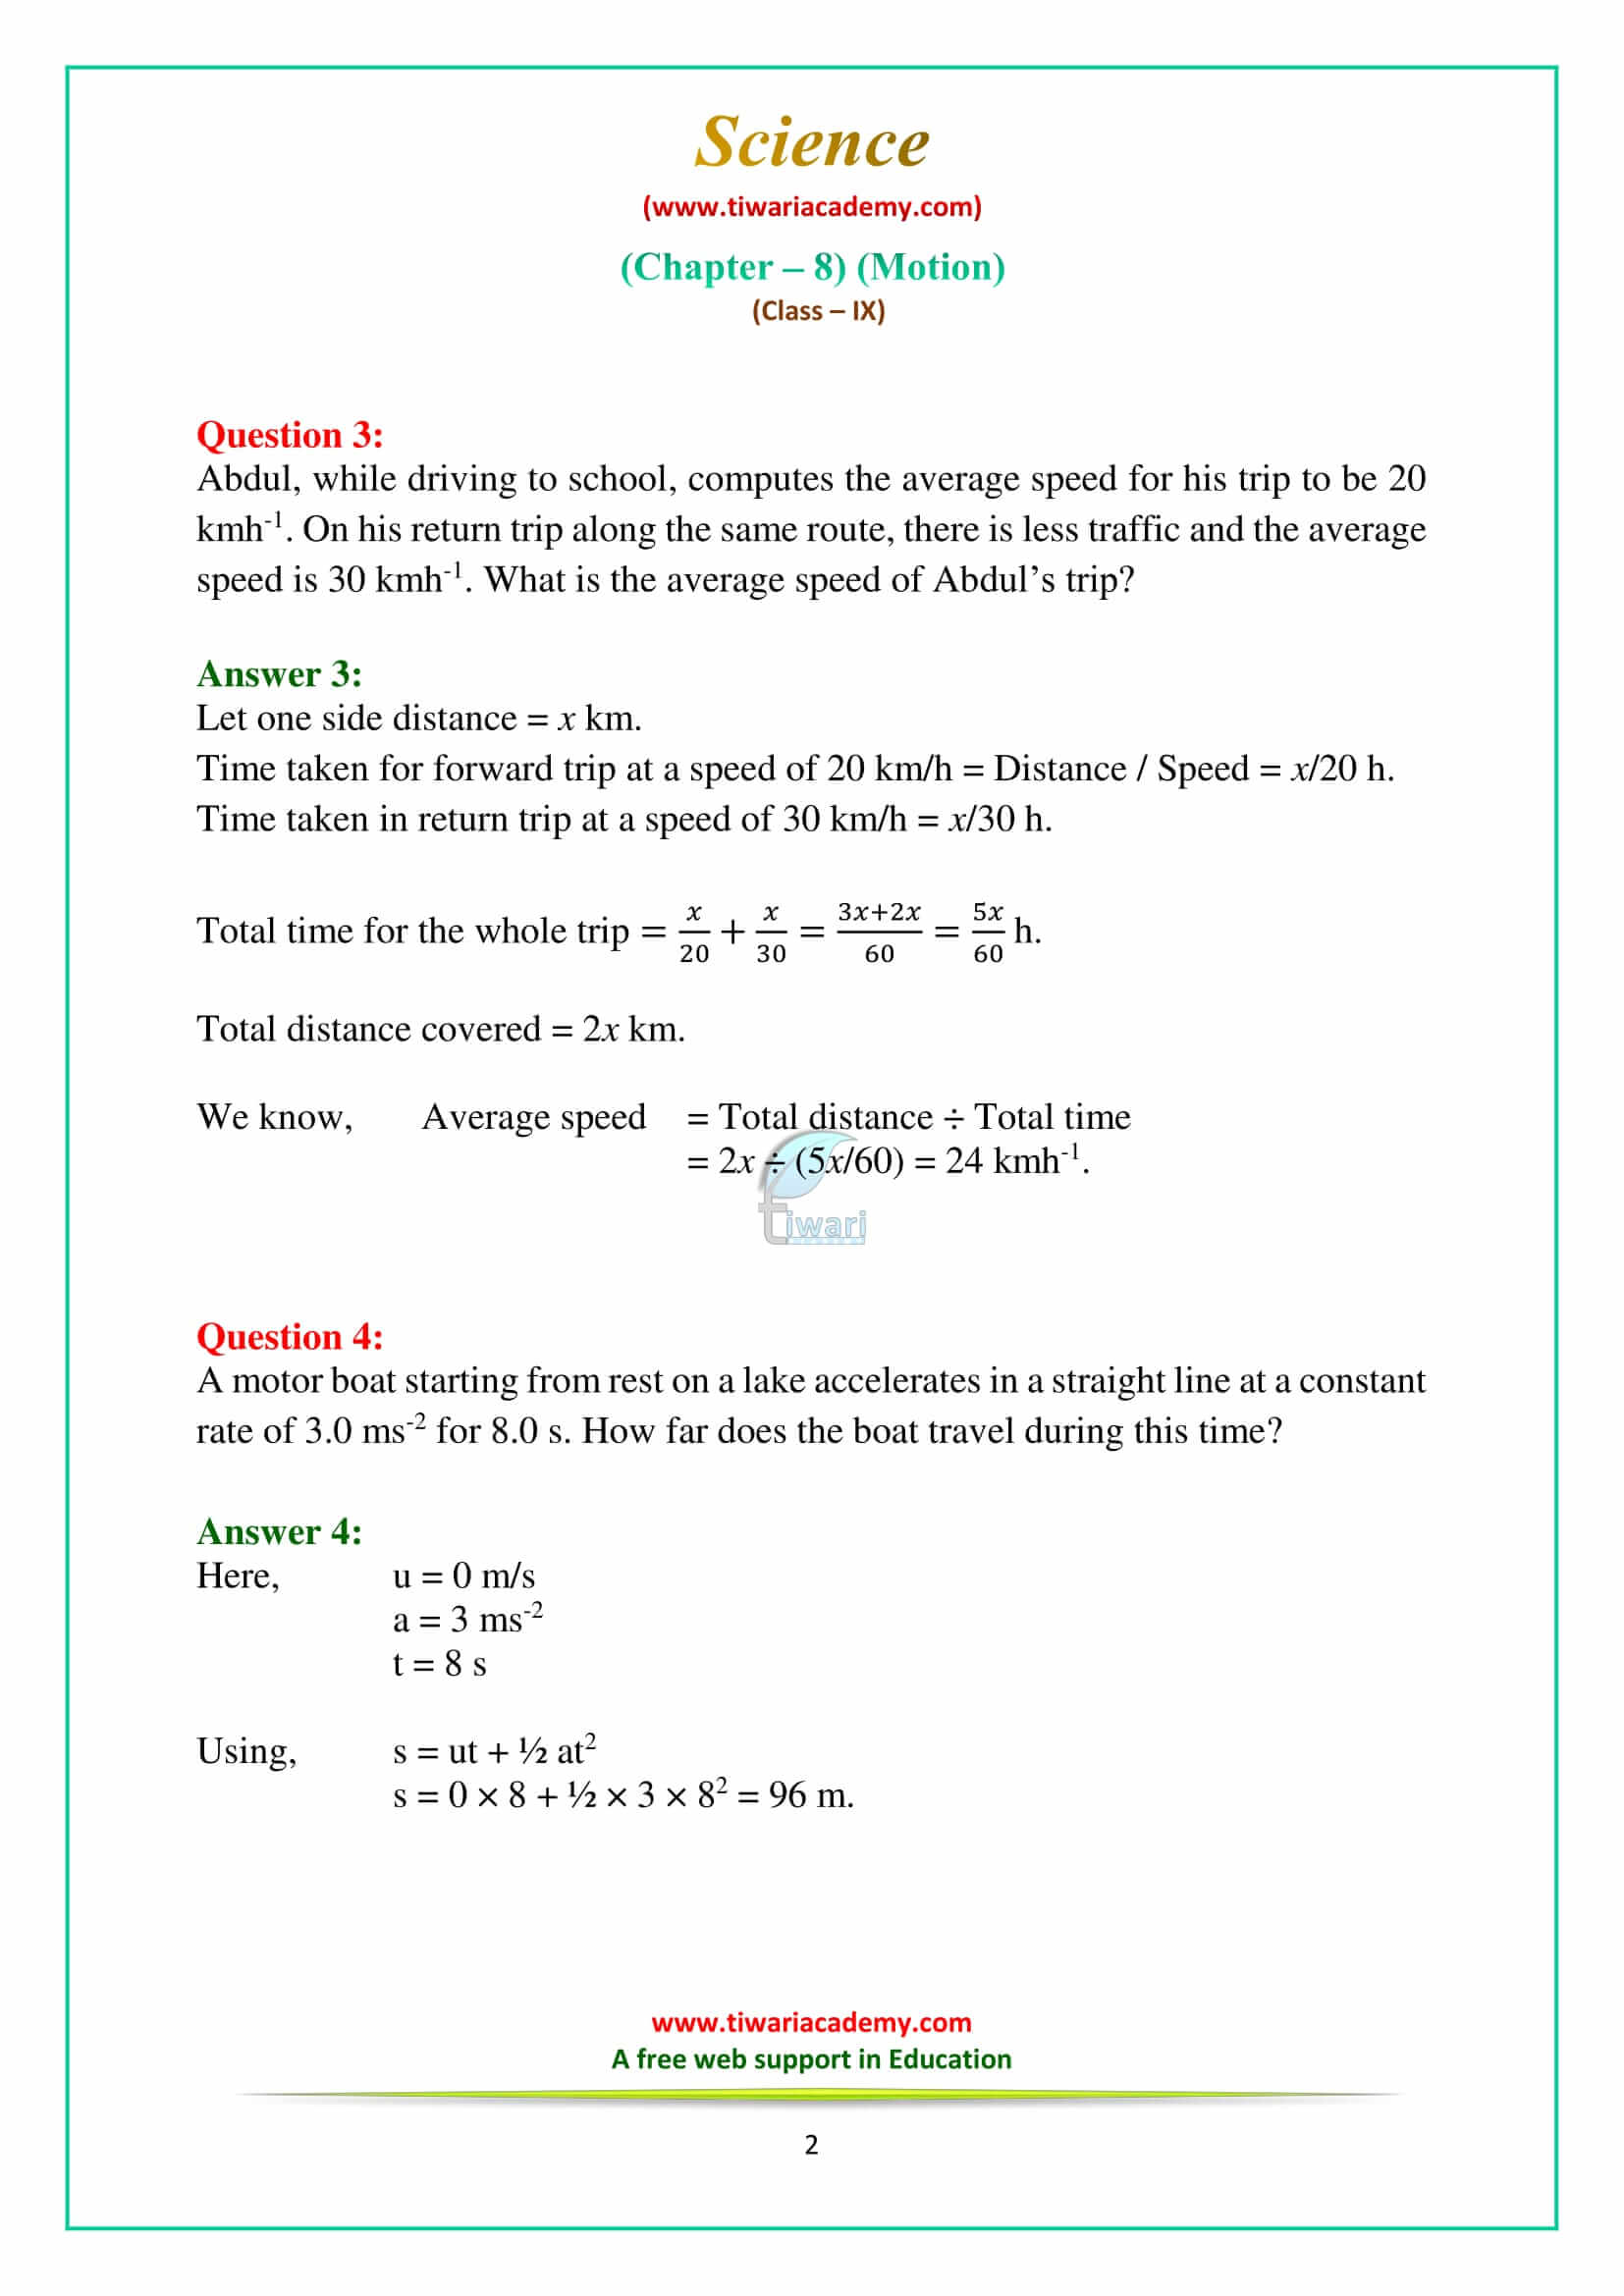 NCERT Solutions for Class 9 Science Chapter 8 Motion Exercises Question Answers in pdf form free